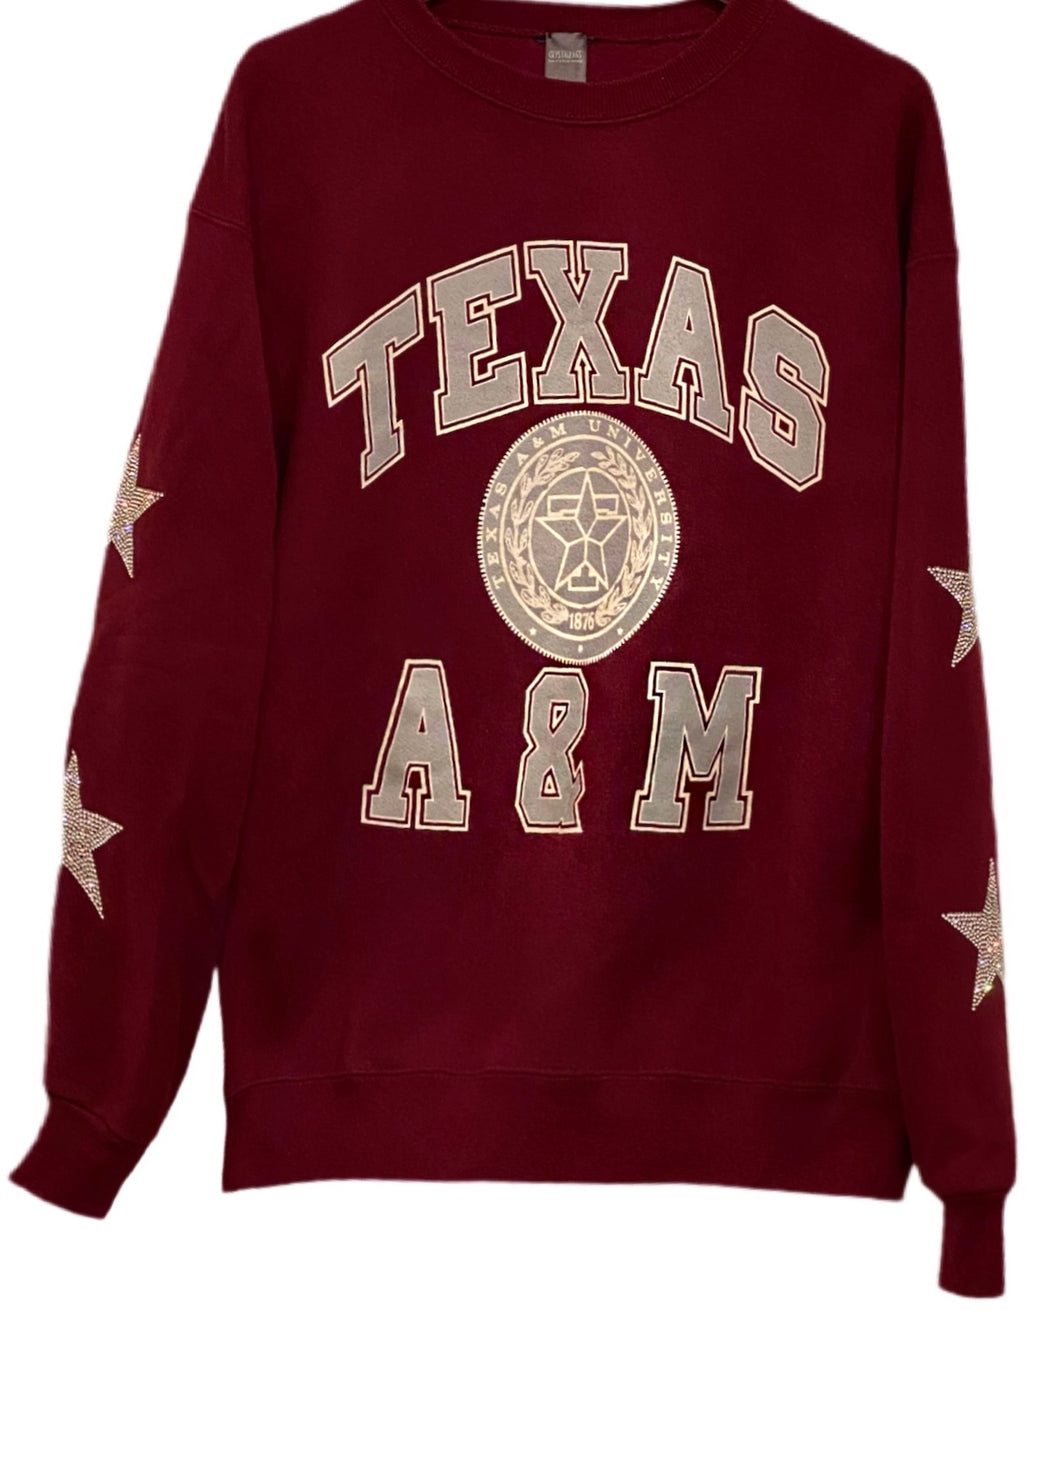 Texas A&M University, One of a KIND Vintage Sweatshirt with Crystal Star Design